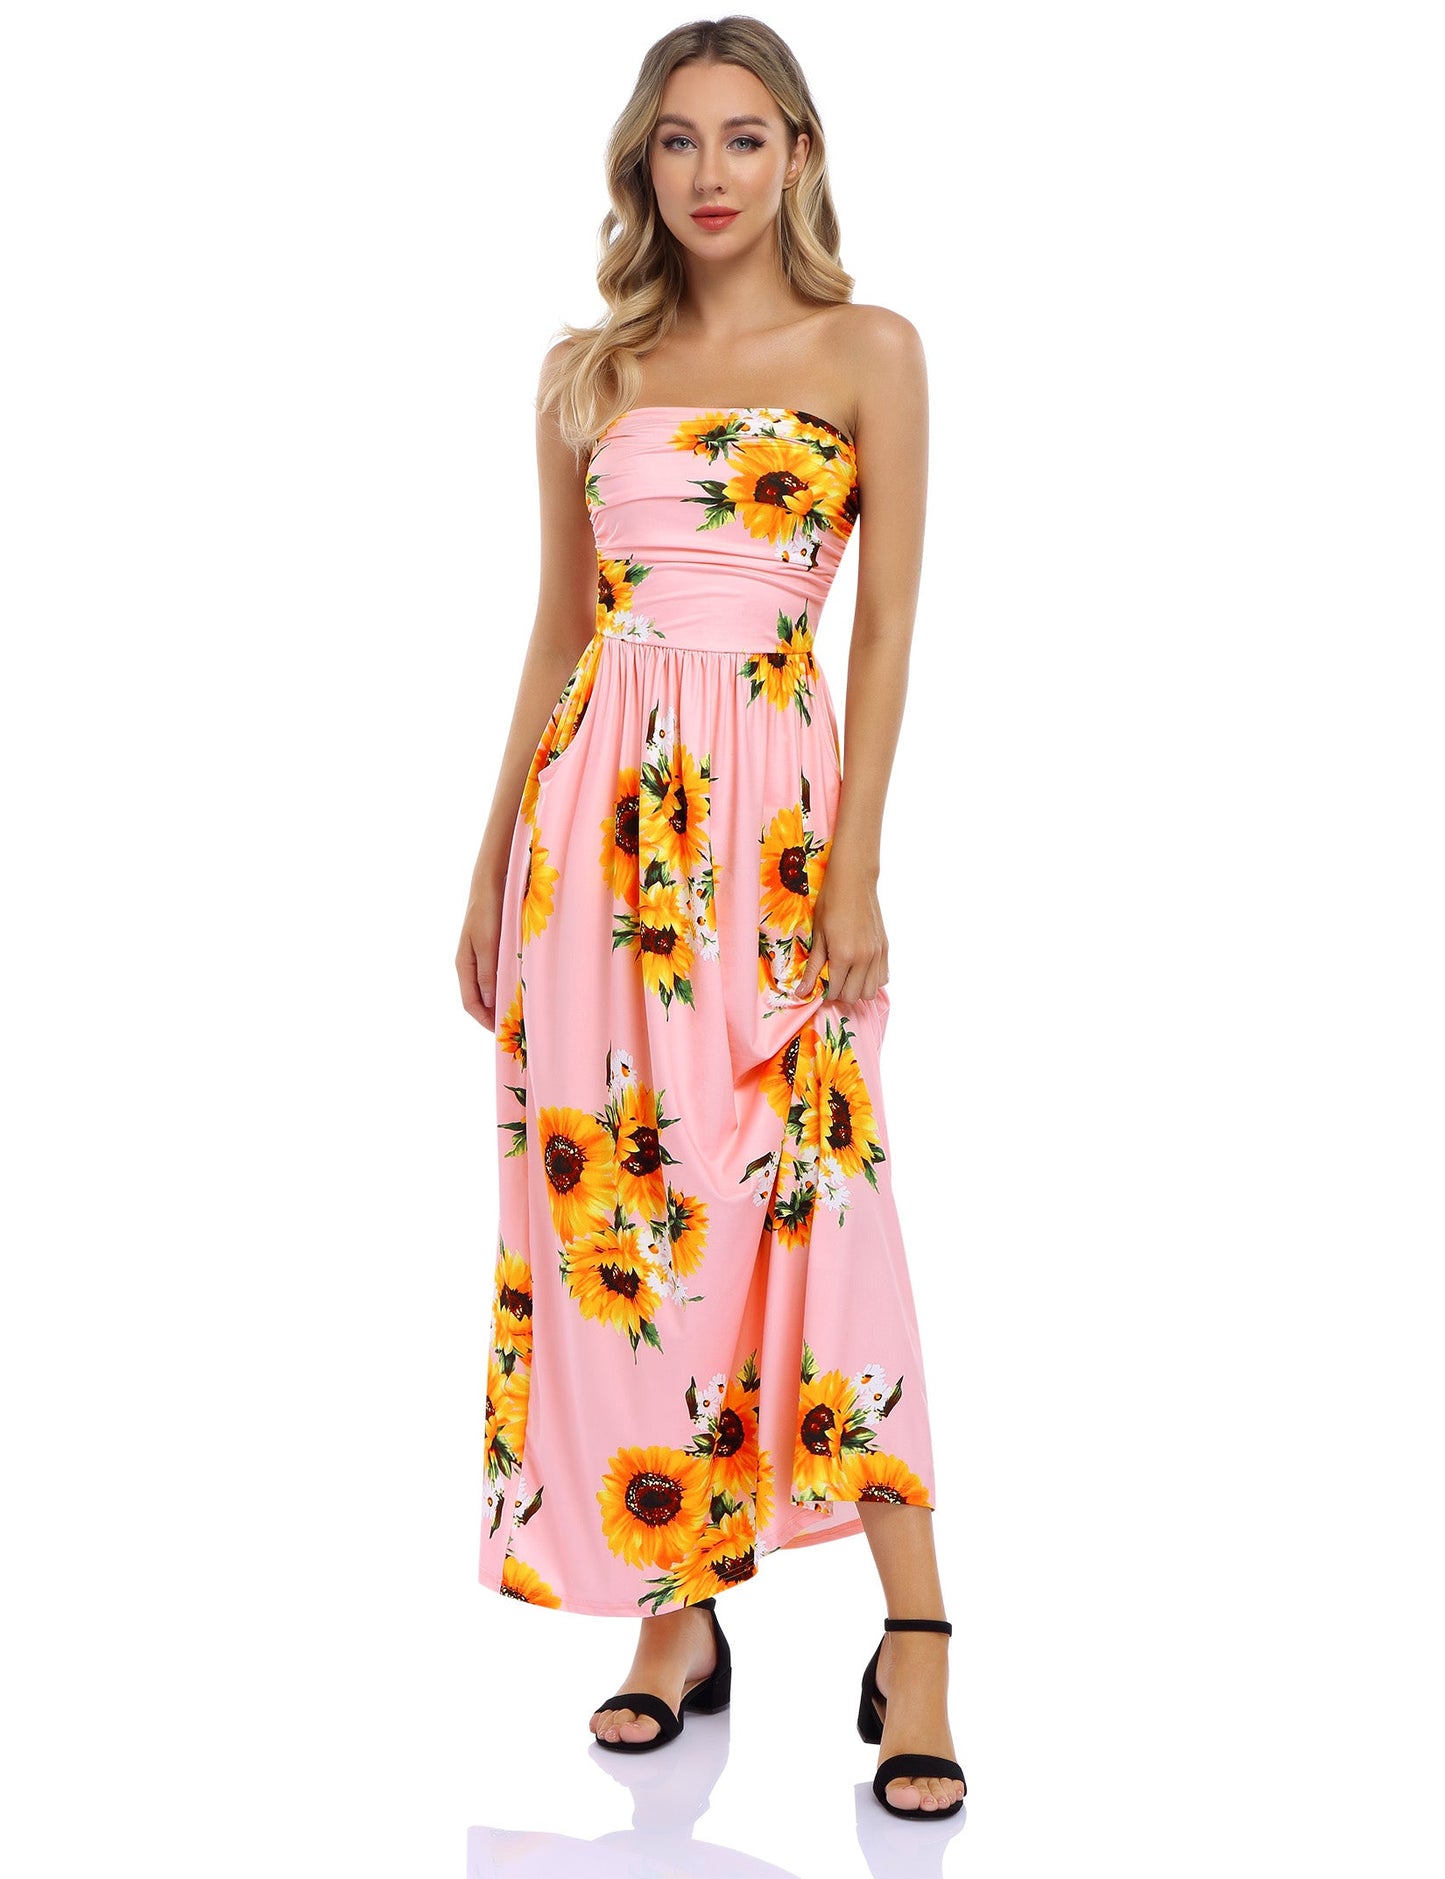 YESFASHION Women's Strapless Graceful Floral Party Maxi Long Dress Apricot